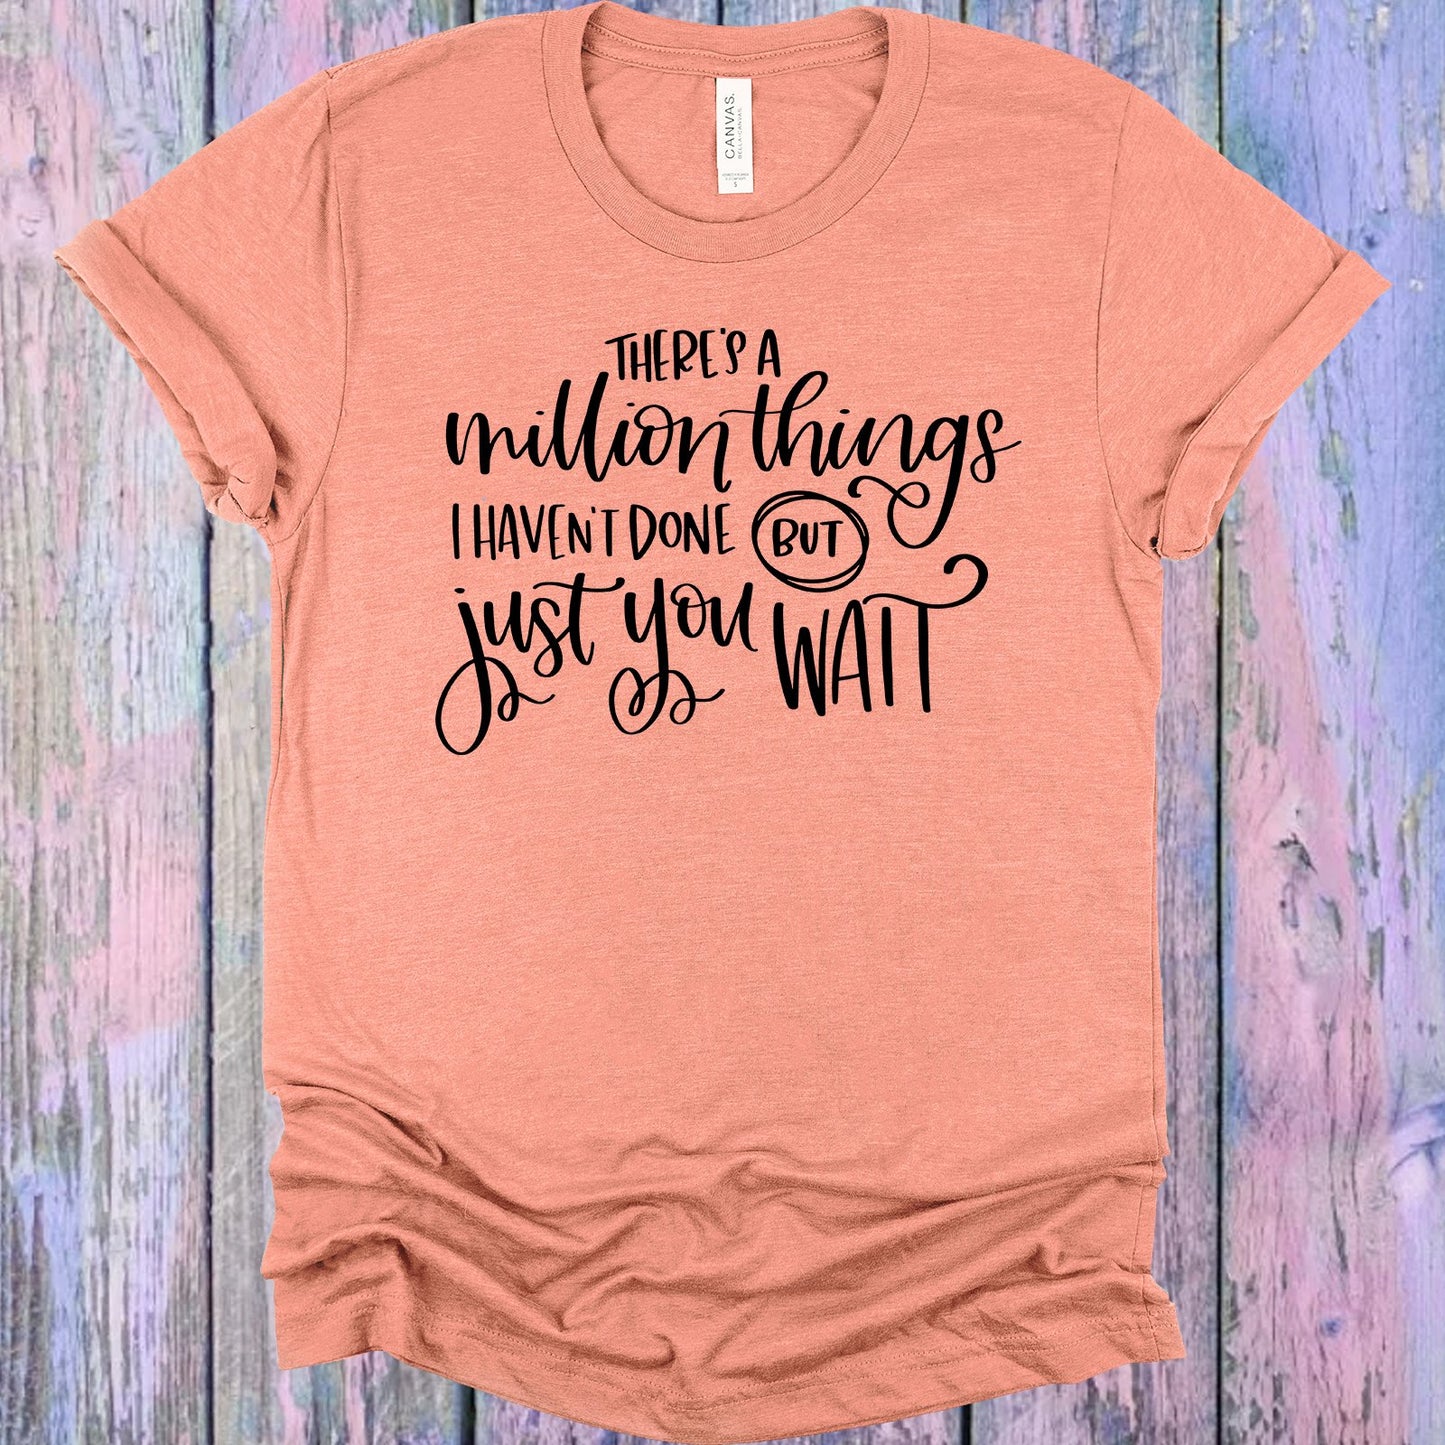 Theres A Million Things I Havent Done But Just You Wait Graphic Tee Graphic Tee